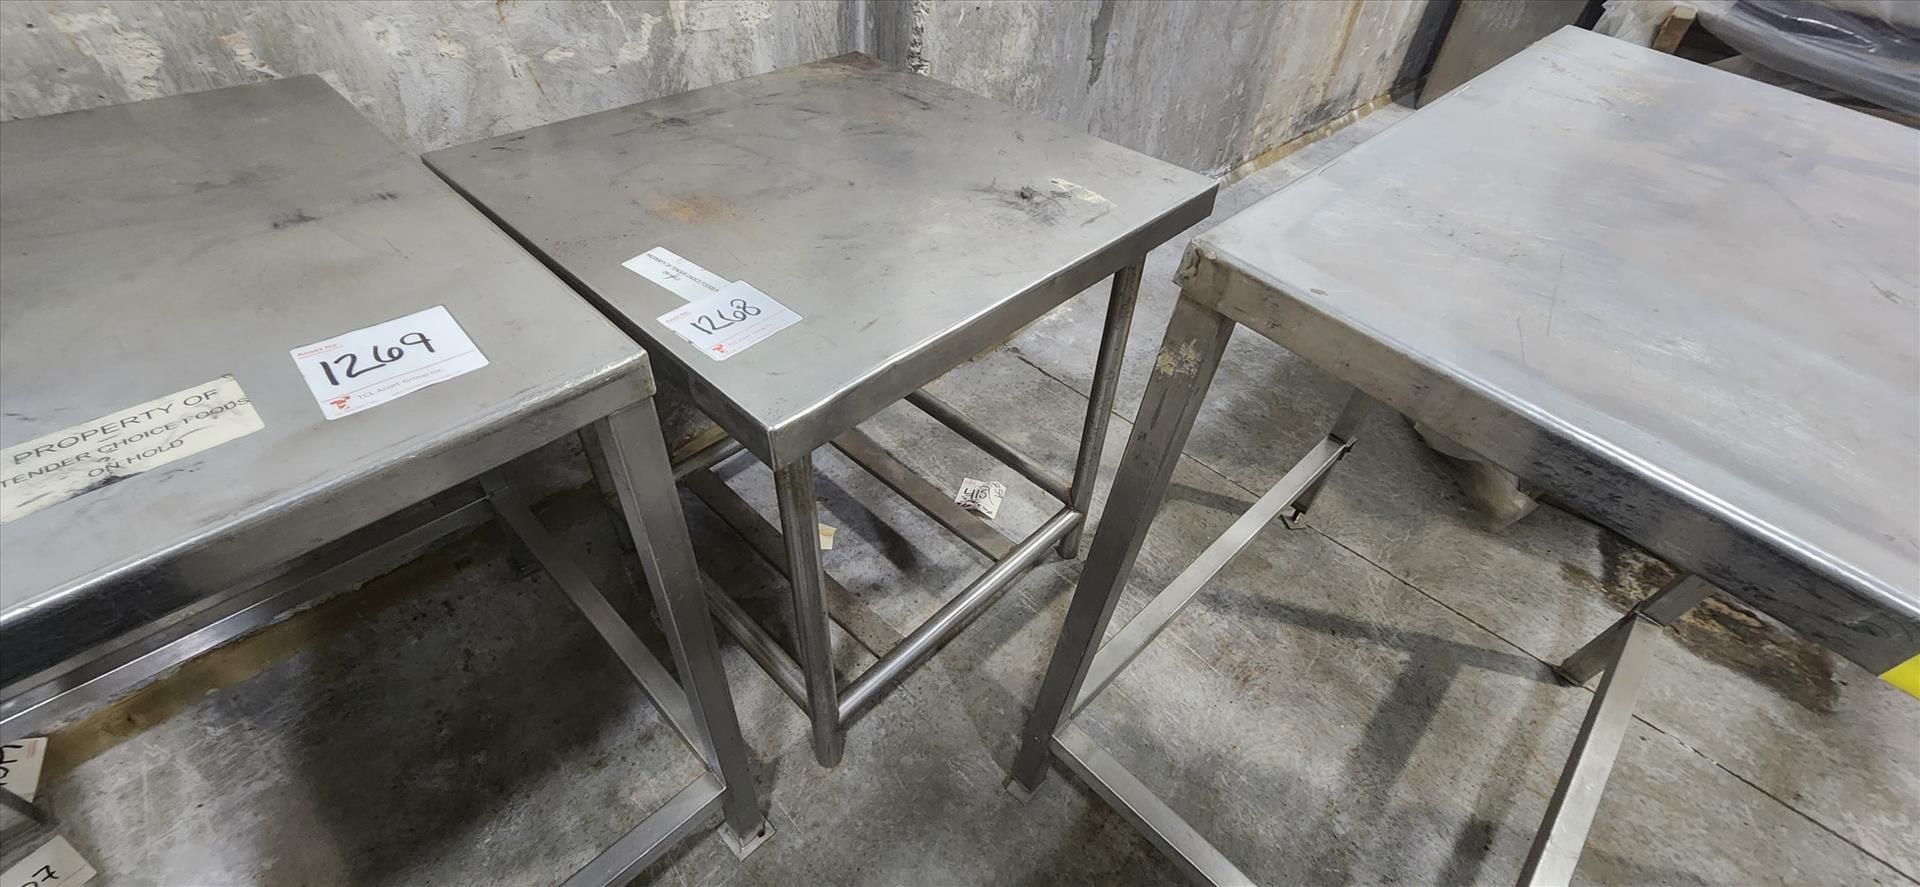 table, stainless steel, approx. 30 in. x 30 in. [TAG 1268 - LOC Brockley Dr.]